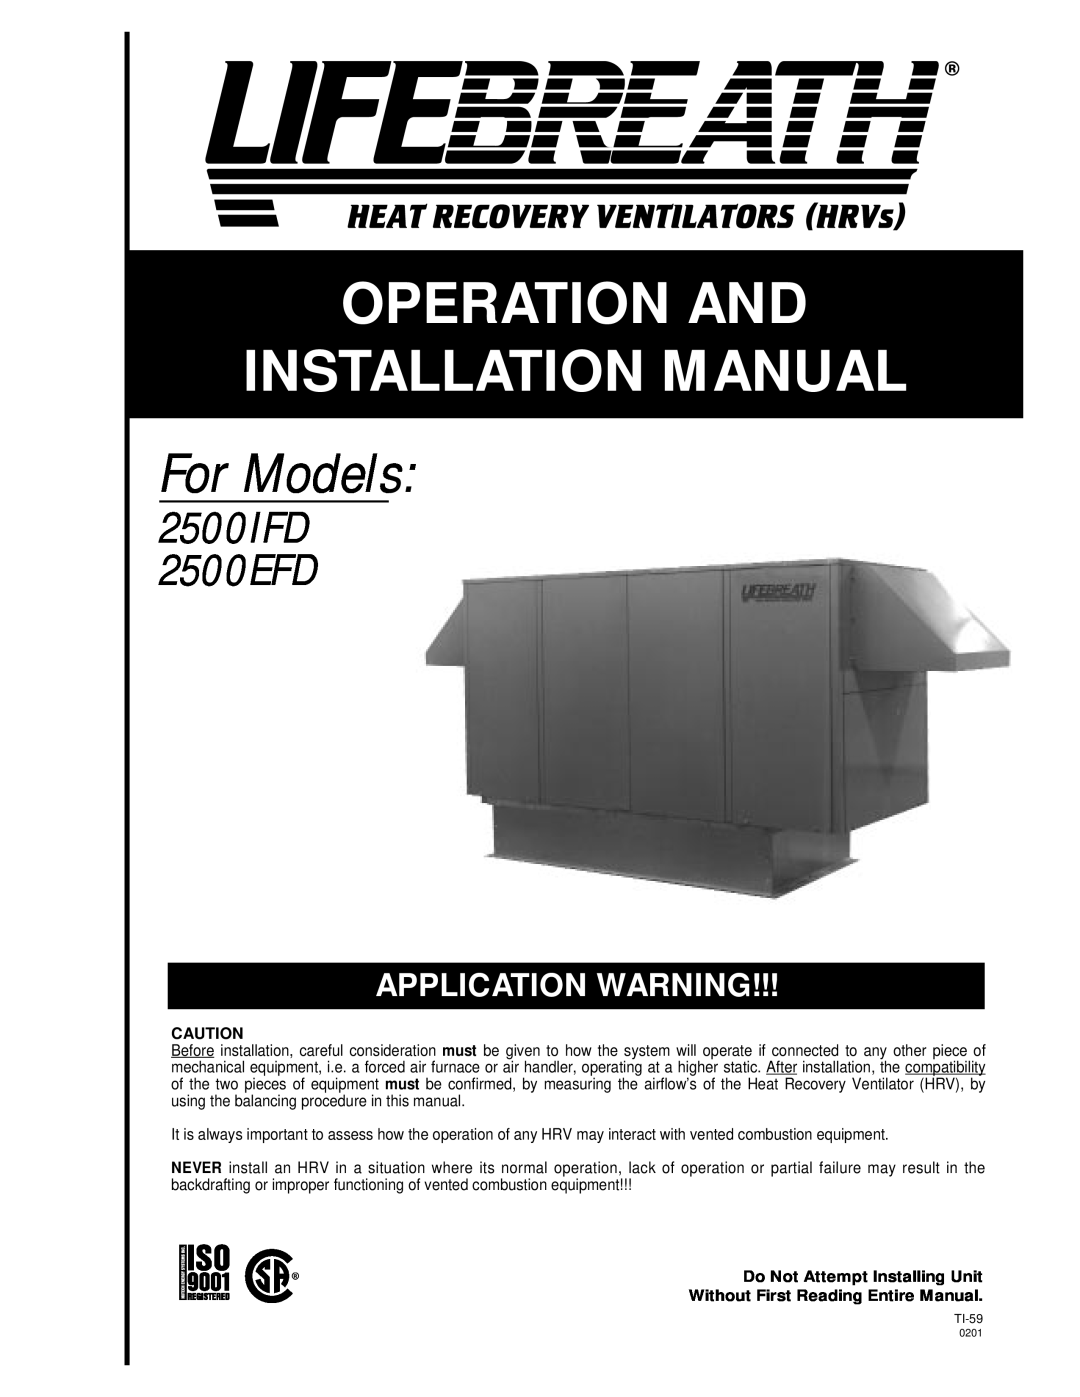 Lifebreath 2500EFD specifications For Models, 2500IFD, Manual Before Installing Unit, Operation And Installation Manual 